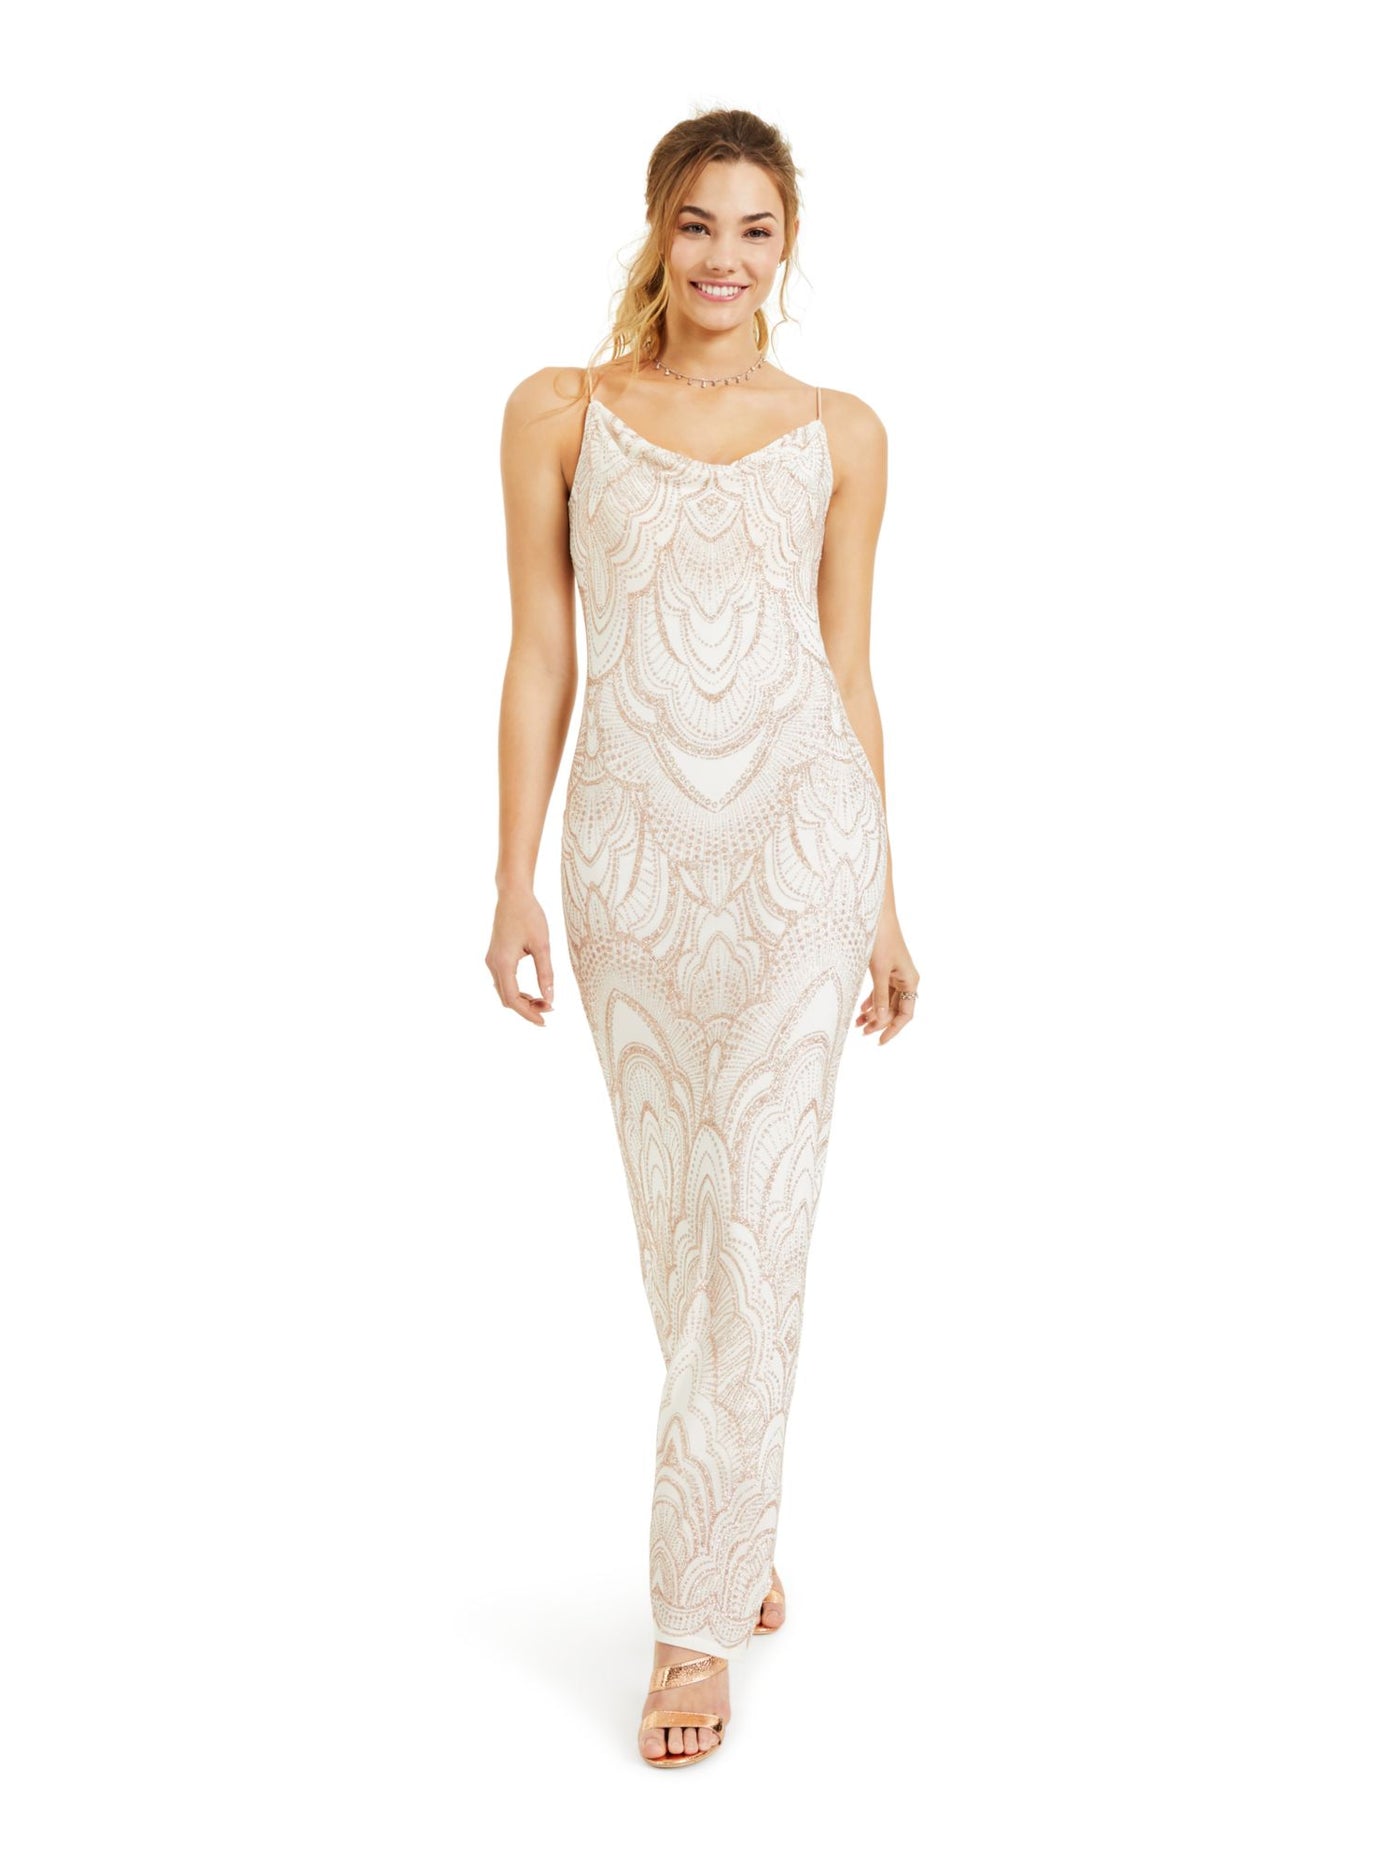 JUMP APPAREL Womens Ivory Glitter Gown Silhouette Printed Spaghetti Strap Cowl Neck Full-Length Evening Dress Juniors 5\6